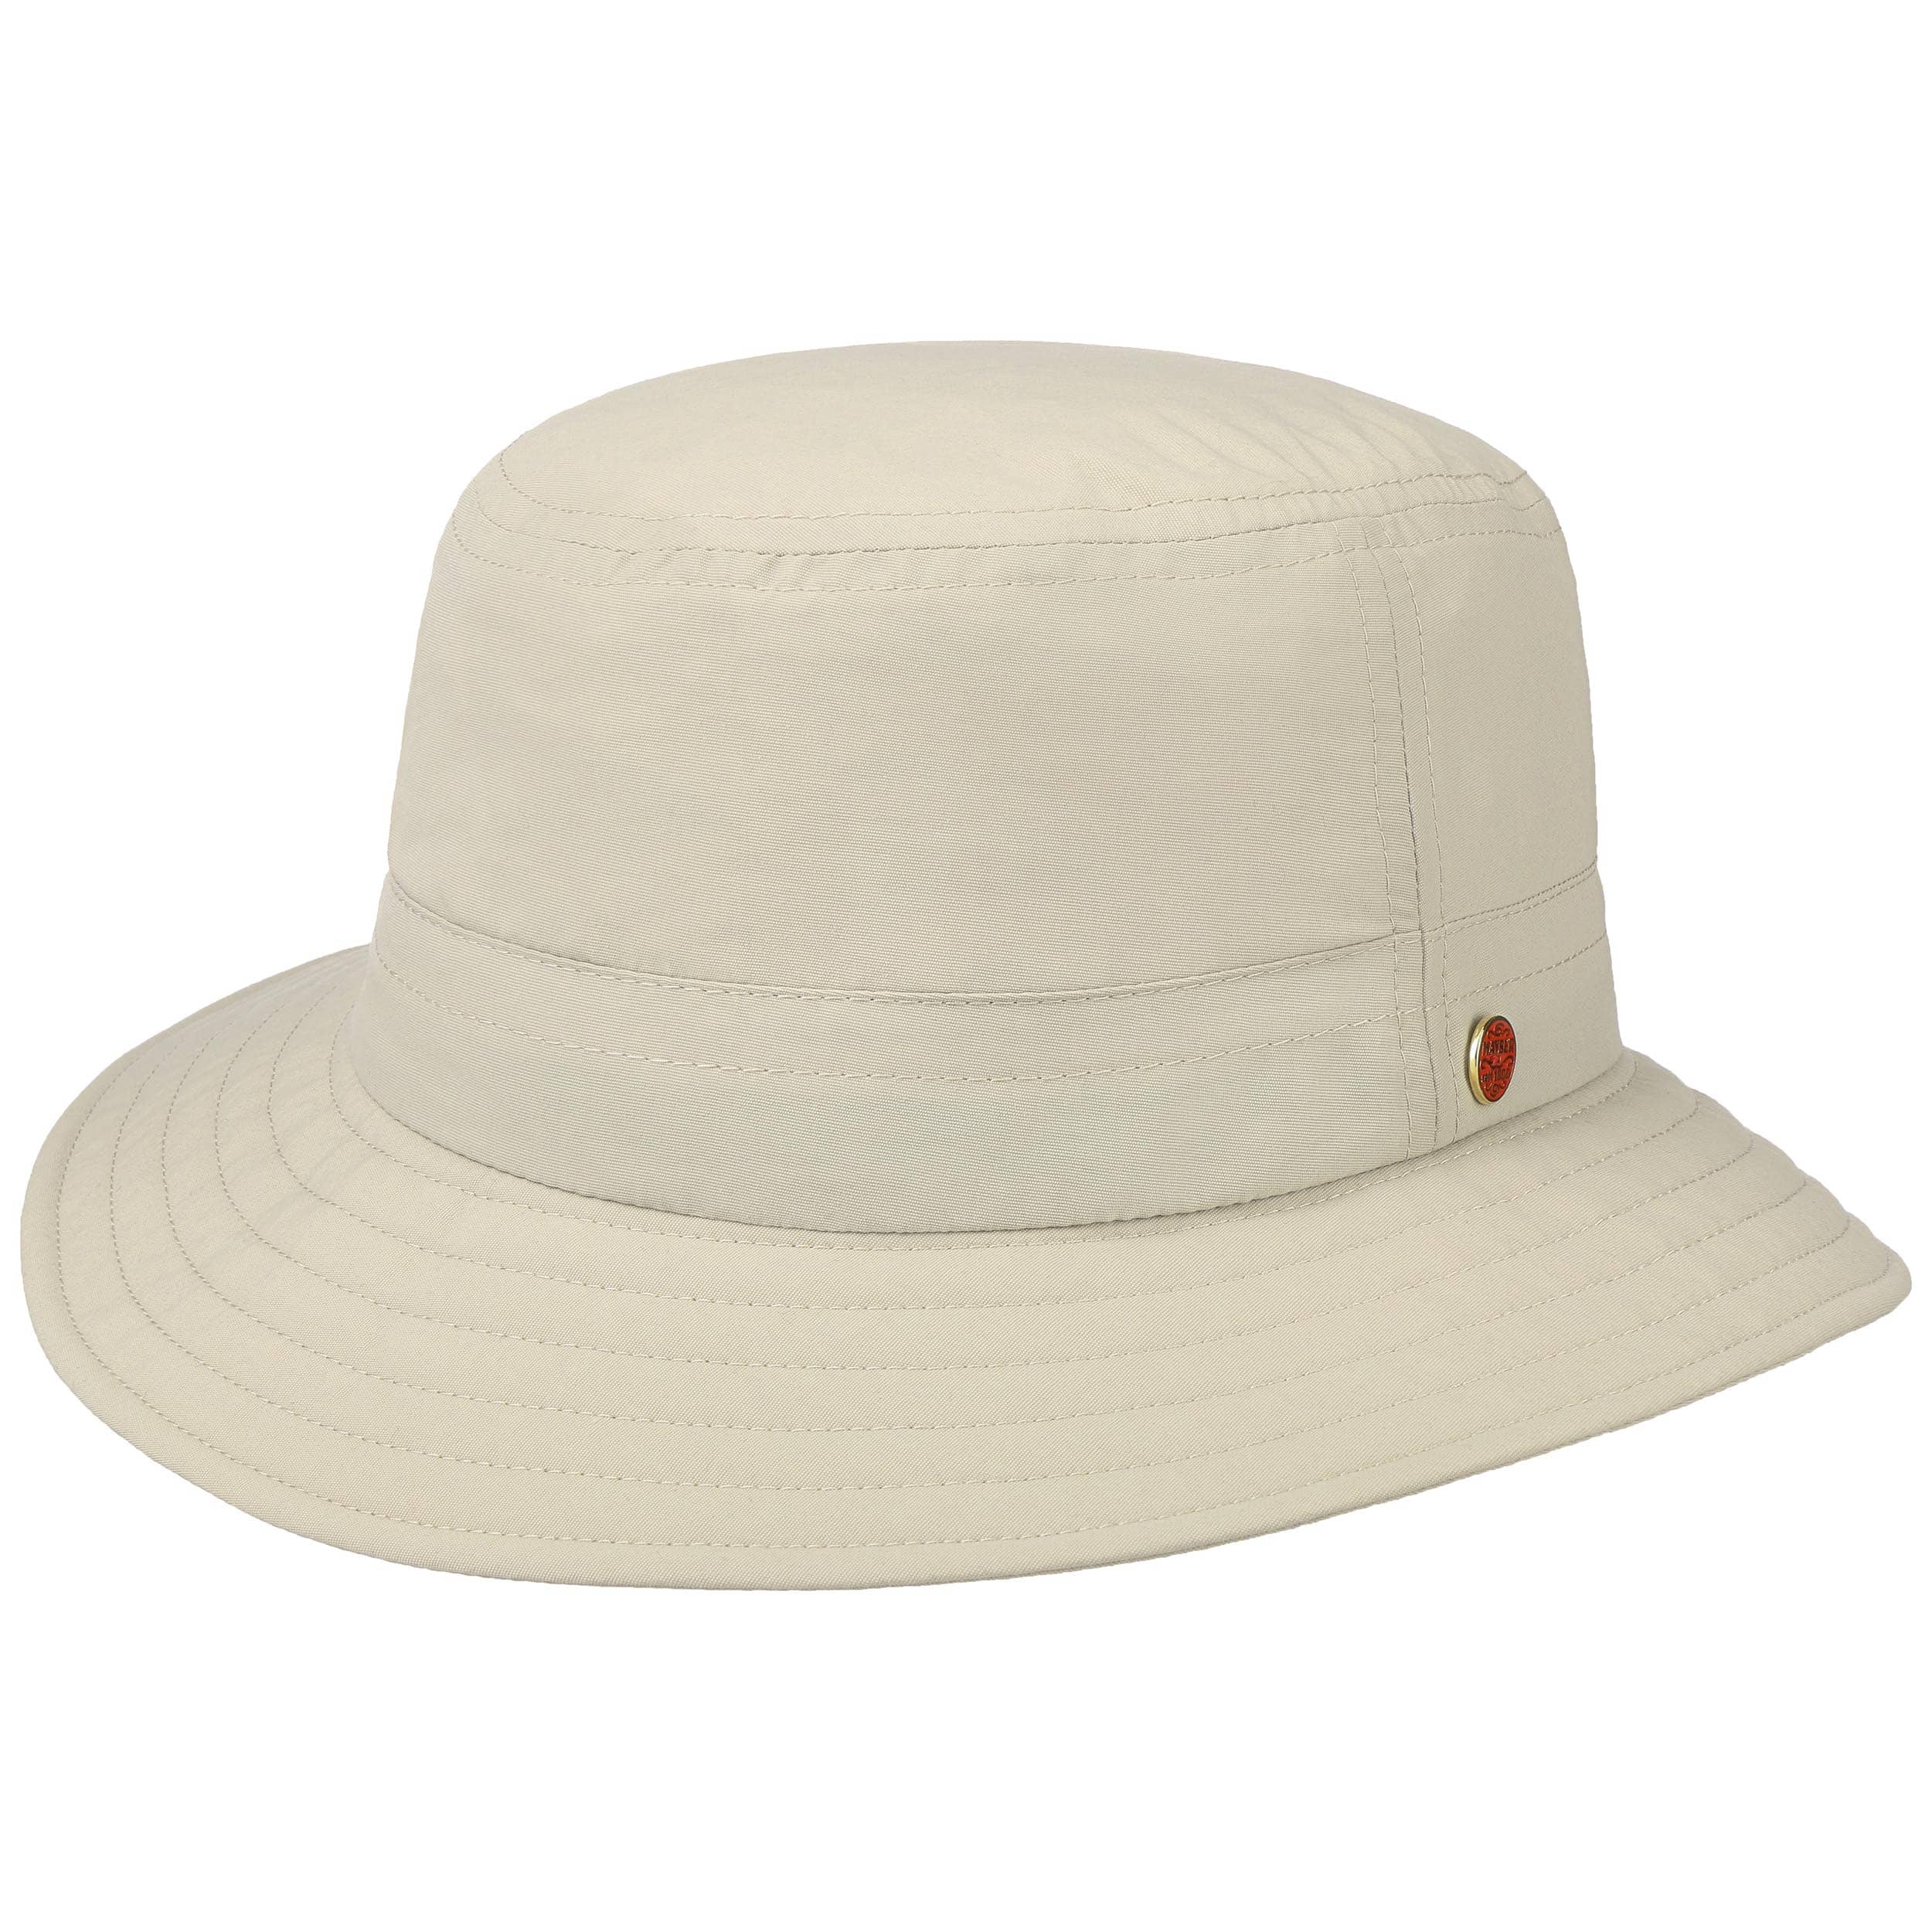 - UV 72,95 € Mayser Protection by Sun Hat